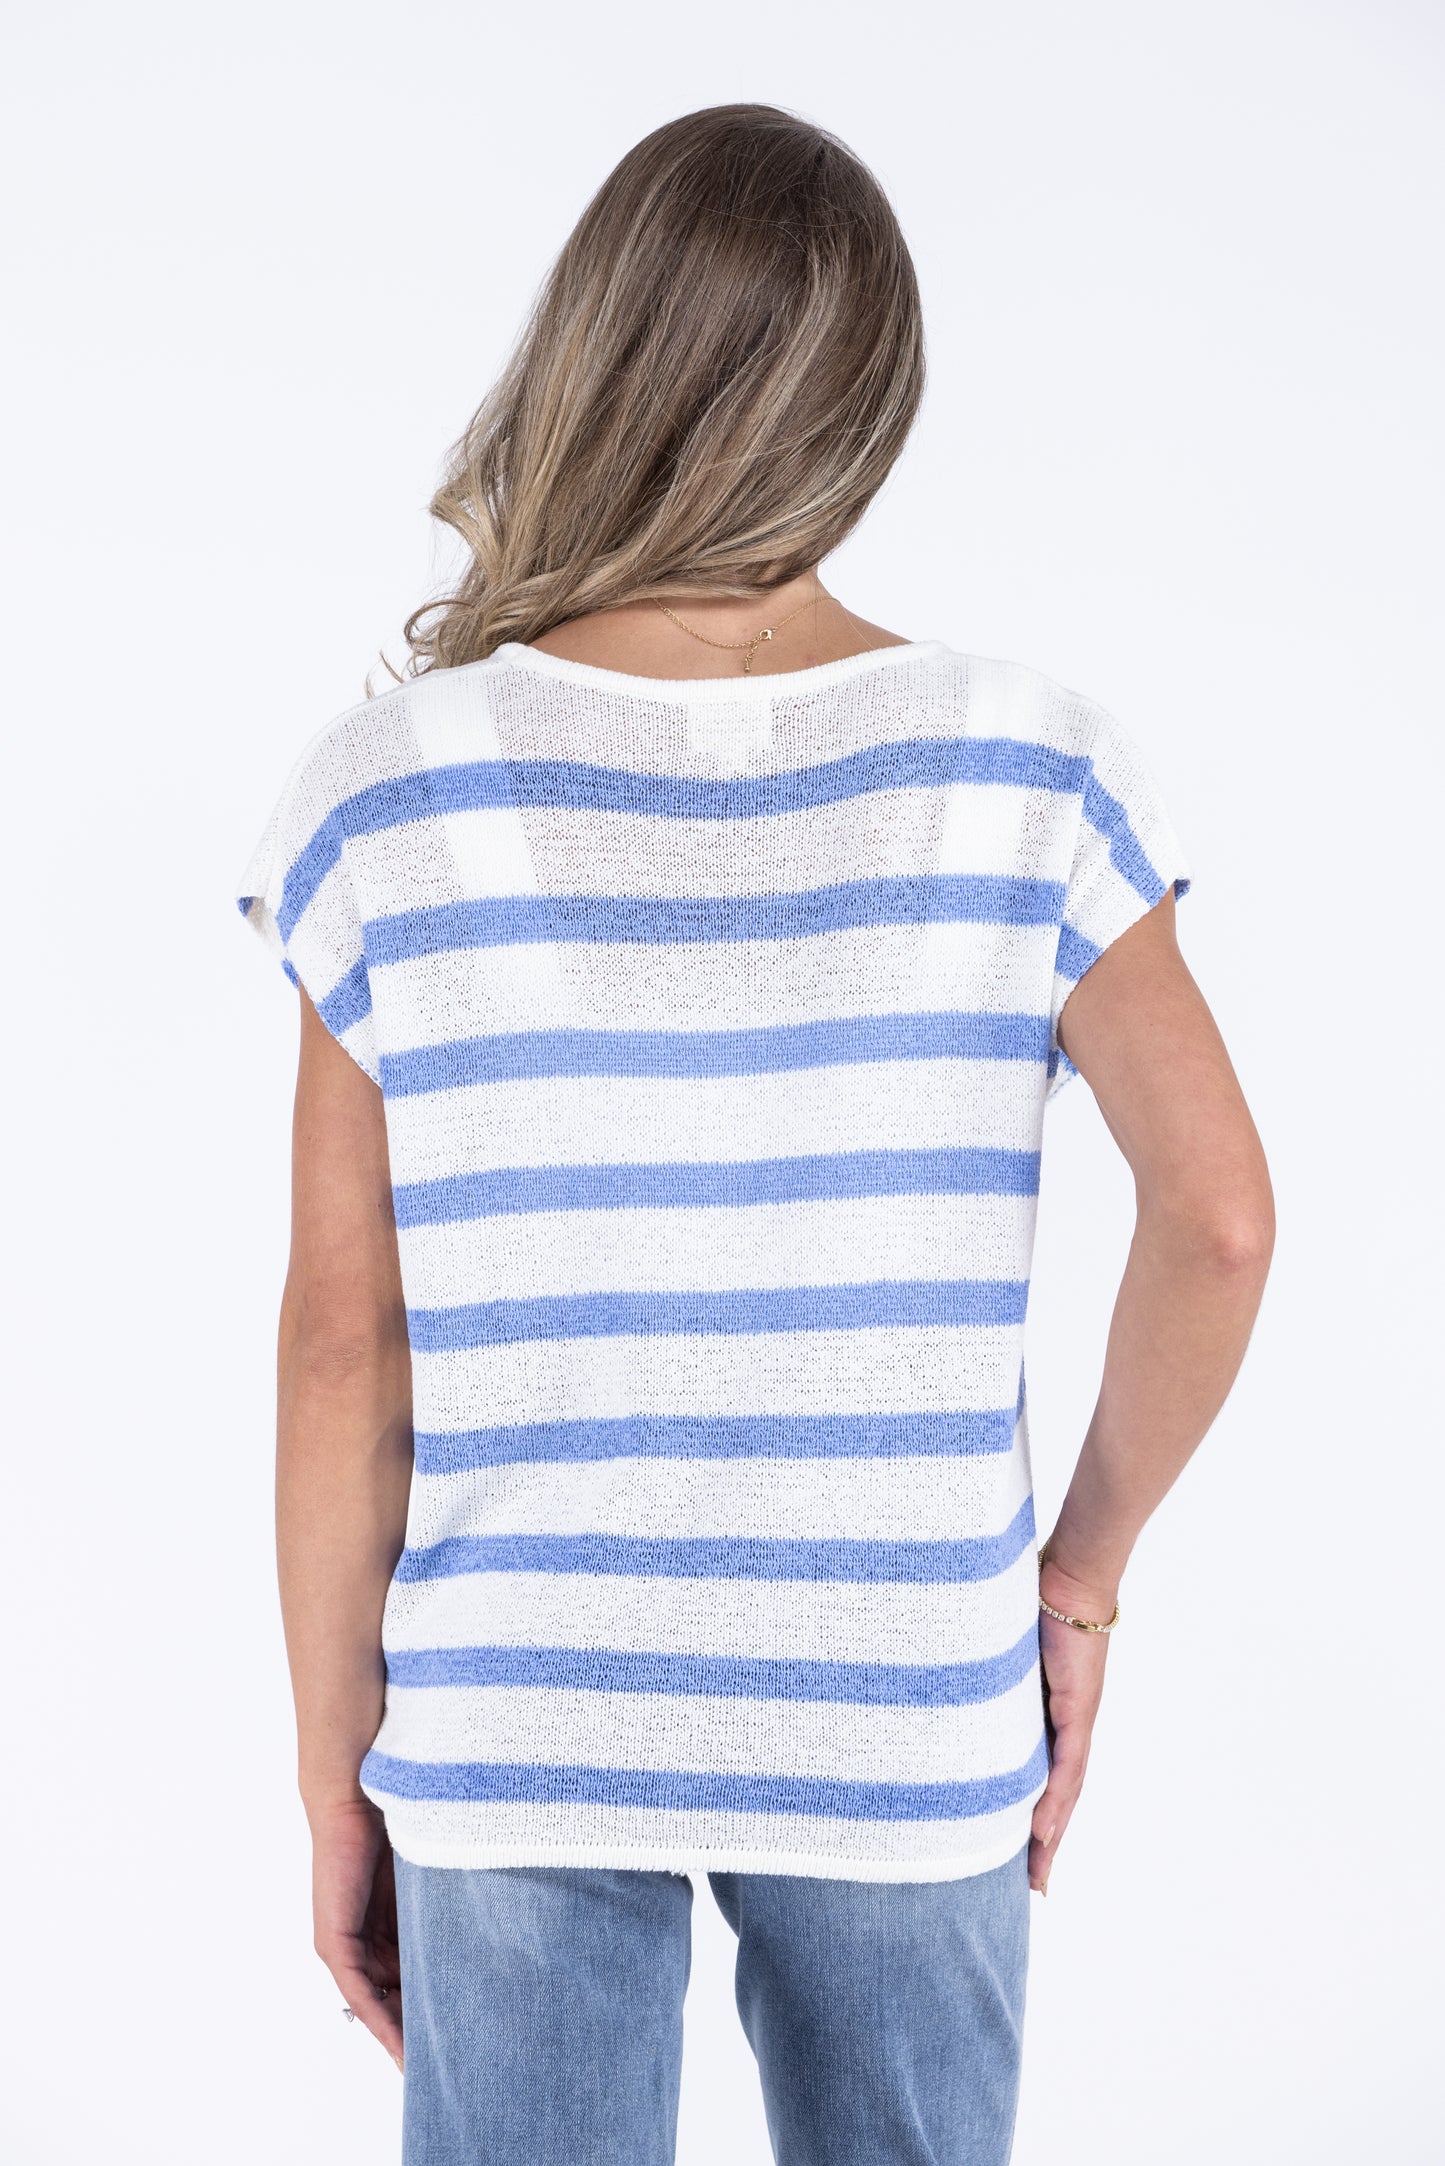 Out of the Park Sleeveless Top